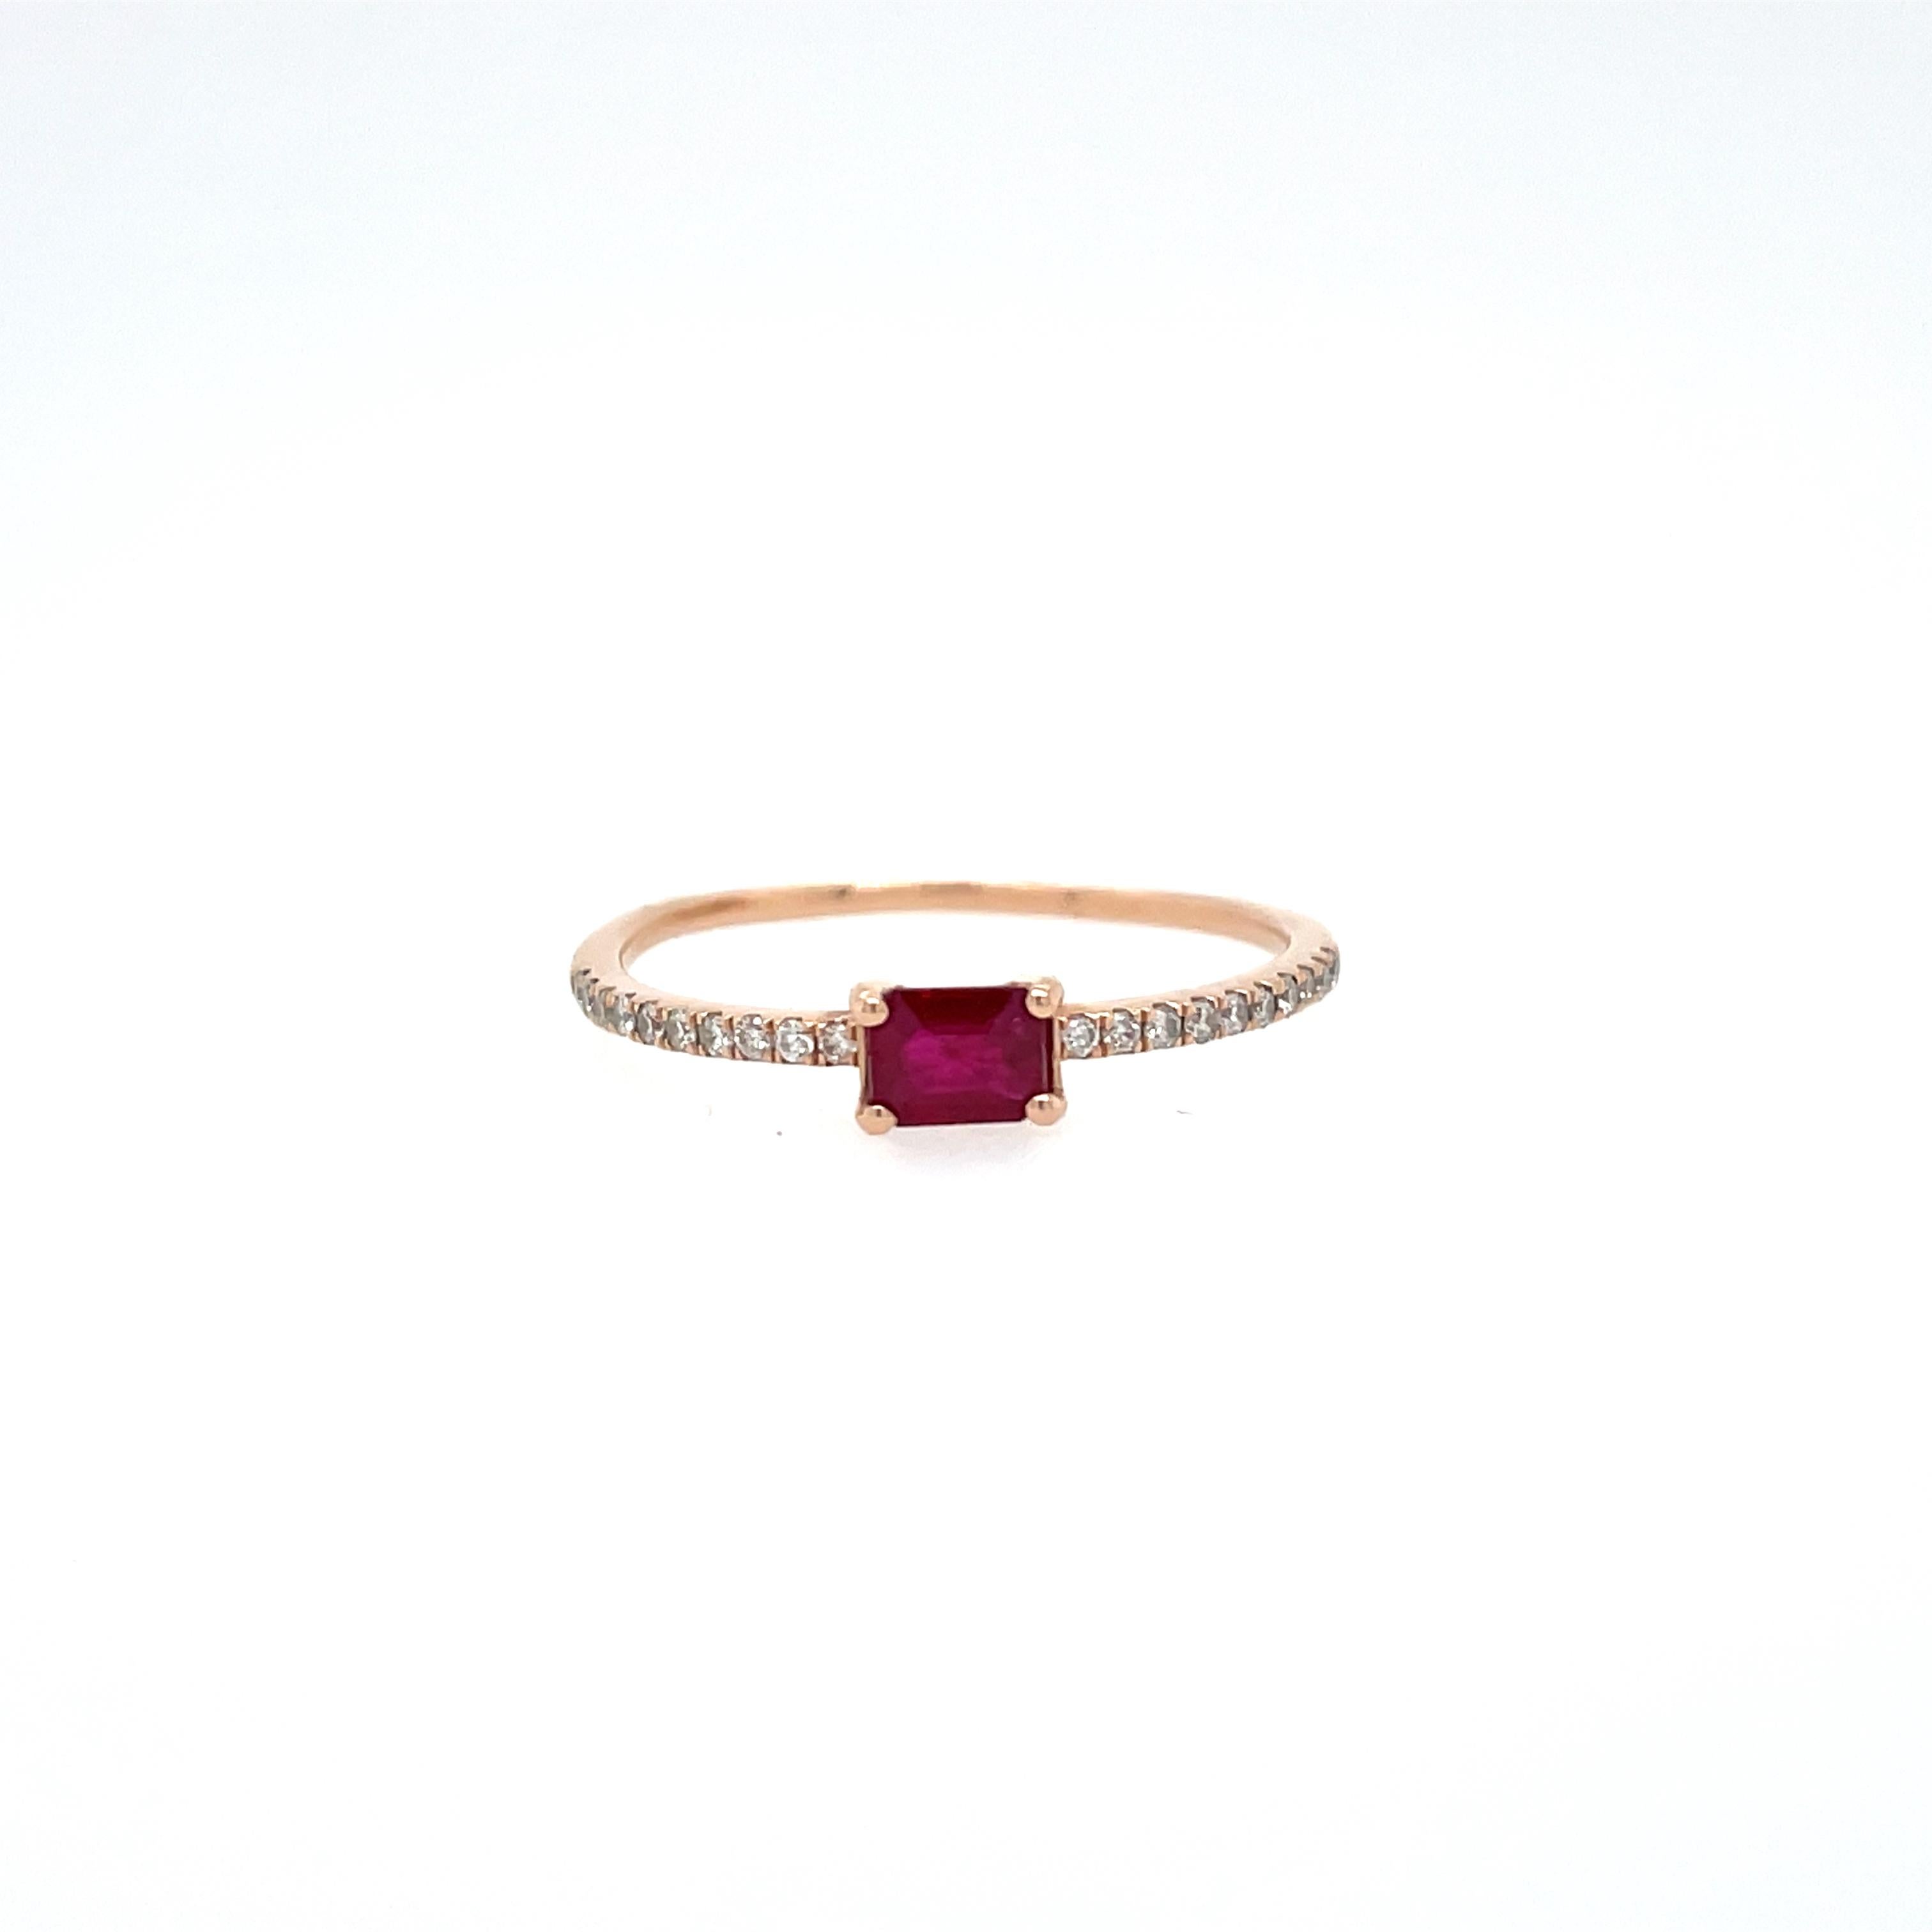 Add this dainty ring to your daily stack!

Featuring a bold red Burmese ruby and accented by natural diamonds, this ring will add a vibrant drop of color to everyday jewelry. The rose gold setting hints at a vintage feel, while still being a classic